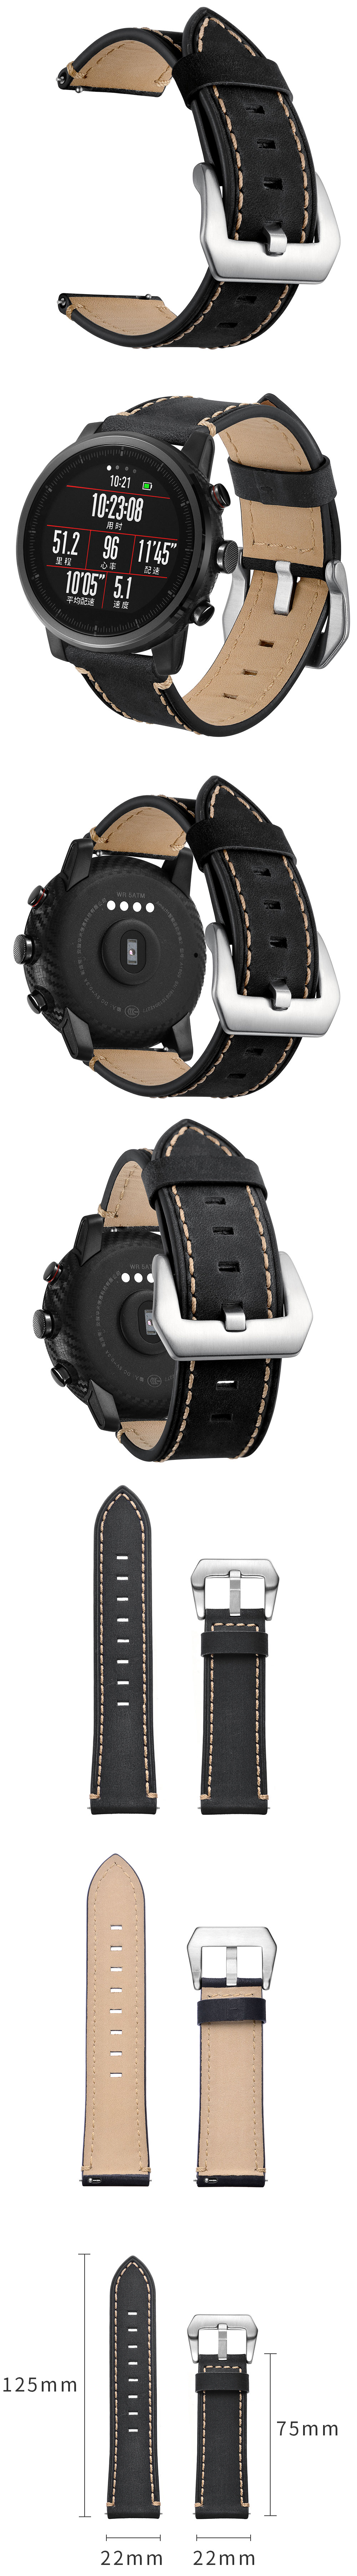 22mm-Genuine-Leather-Watch-Strap-Watch-Band-for-Huami-Amazfit-2-1442664